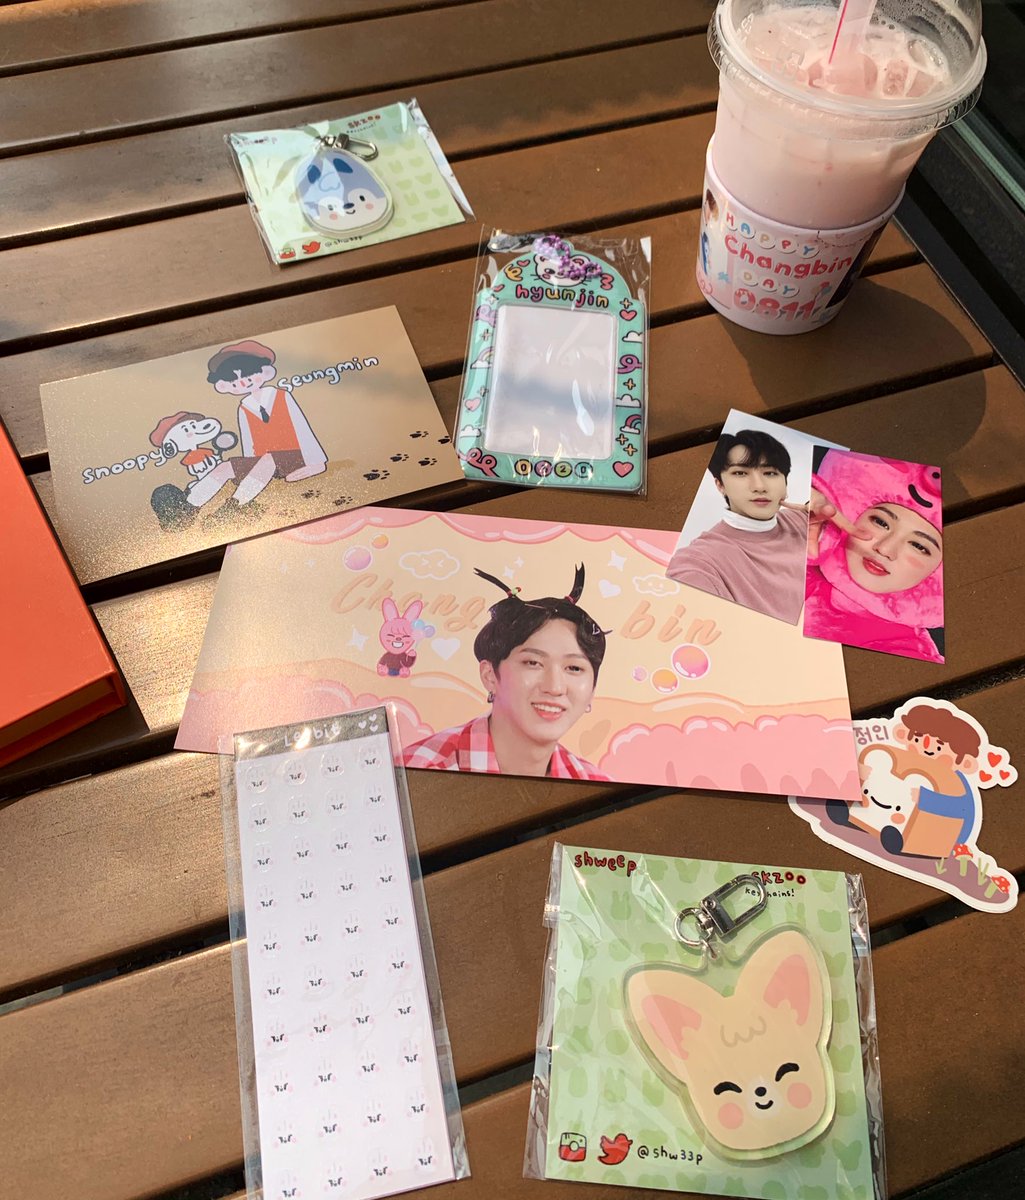 💖LOVEY DOVEY CHANGBIN EVENT 💖

Happy Birthday to our binsual, dwaekki, baby Changbin [08.11.1999] 🐷🐰💕

TY for hosting @cafelovestay and to Caffe Bene. Also had to buy from the amazing vendors! Cute~

#LoveyDoveyChangbin #SpearB
@peachhoneybear @zimtyco @dae_won_ @Stray_Kids